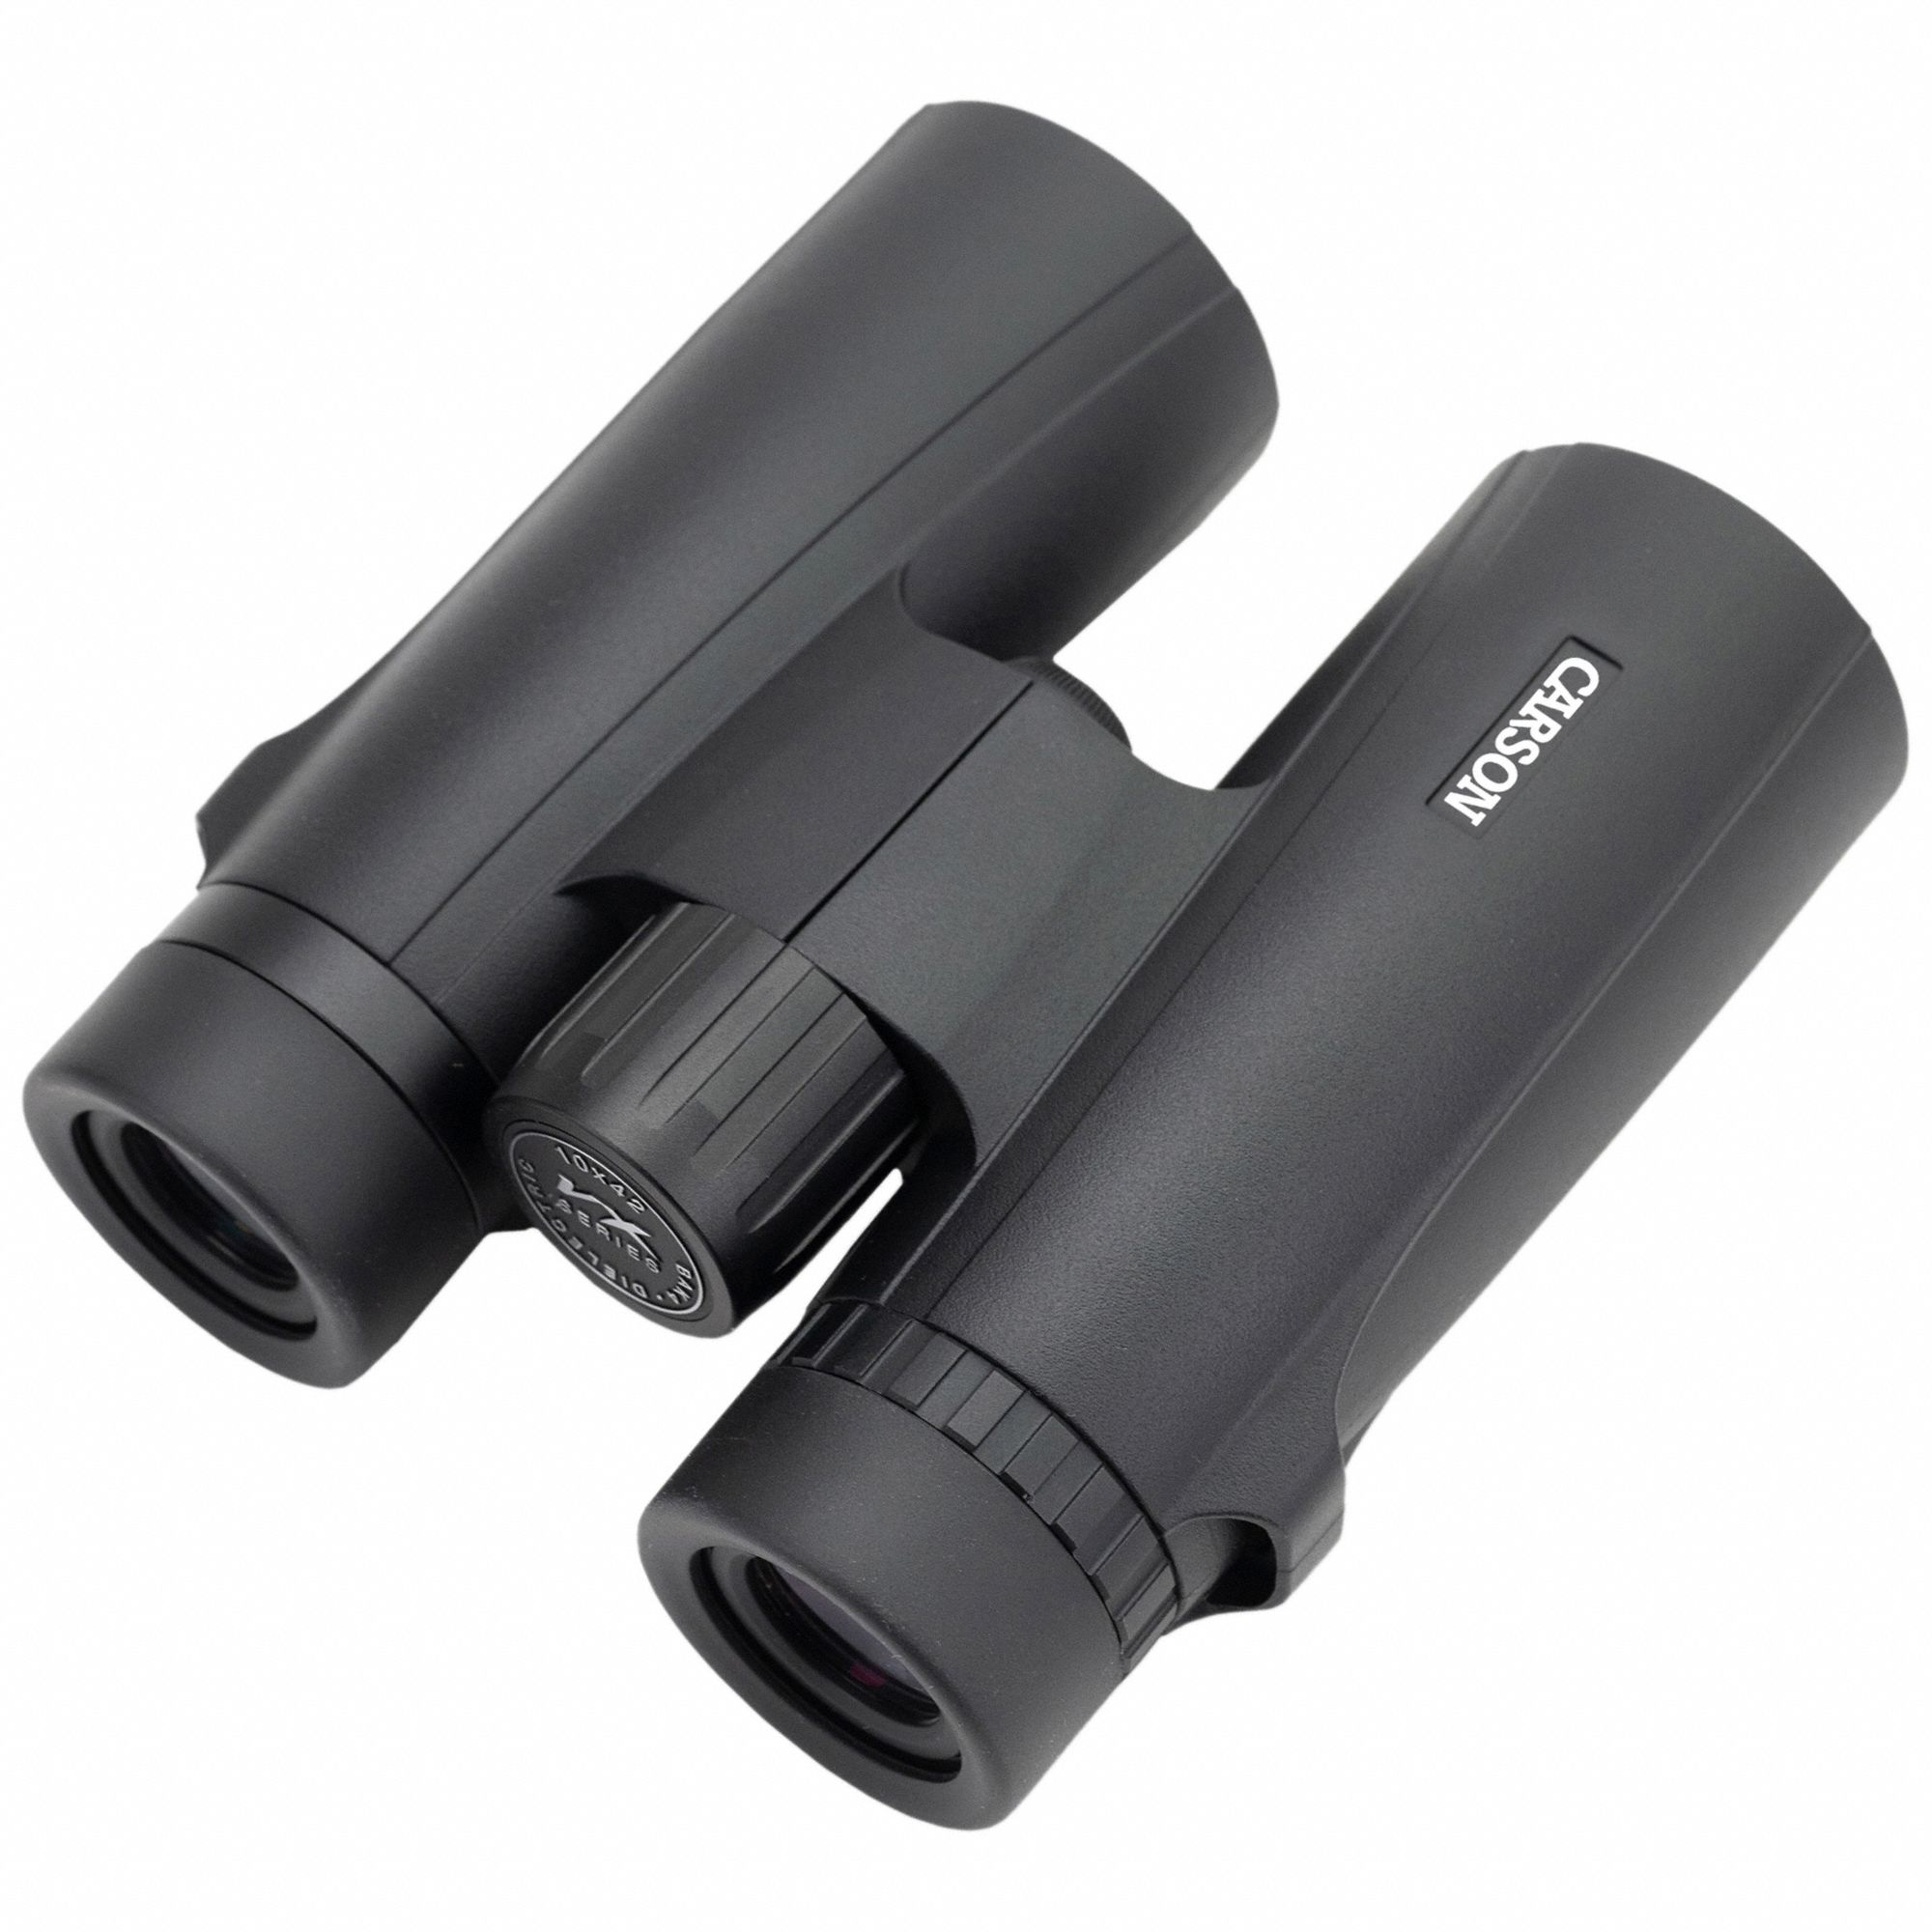 Binocular: Hunting/Nature/Outdoor Activity/Sporting Events, 10x, 318 ft @ 1,000 yd